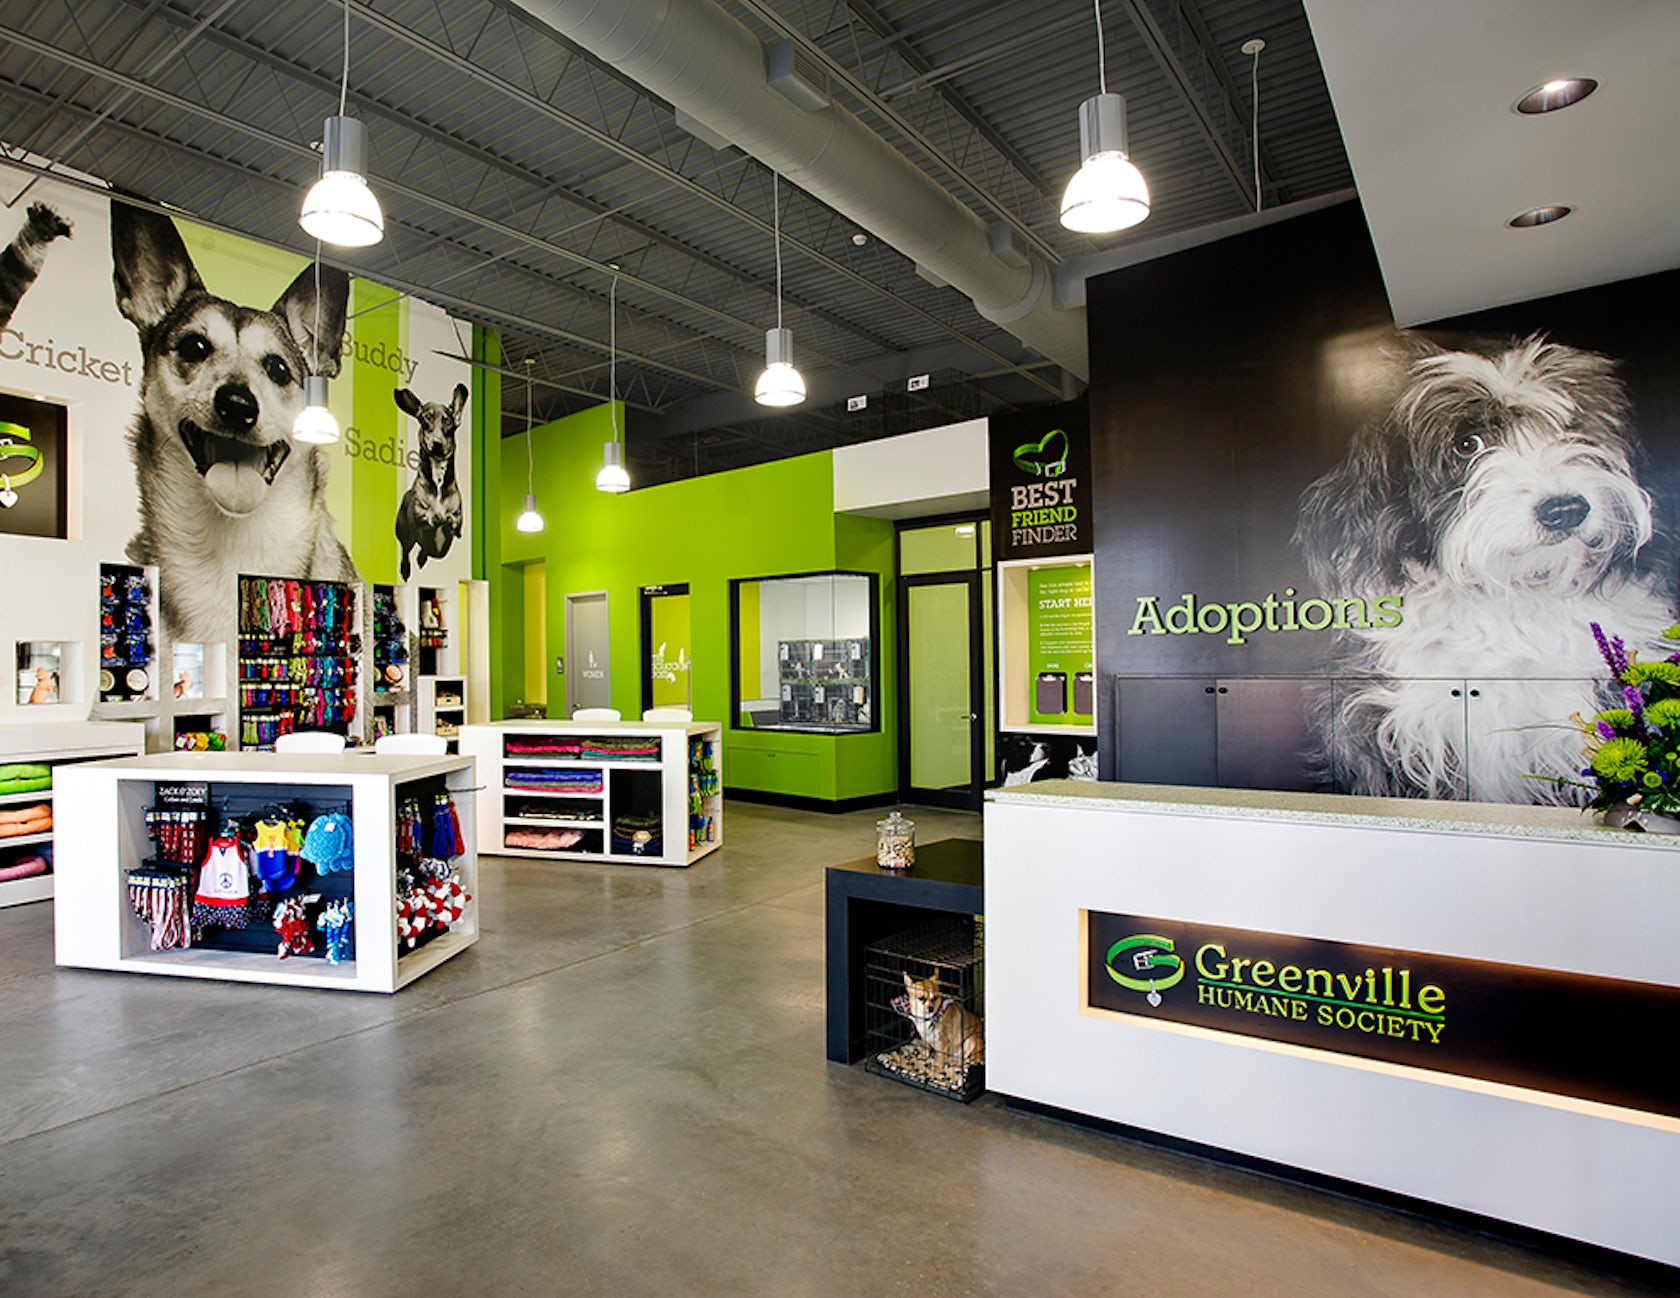 Humane society greenville sc amerigroup over the counter benefits